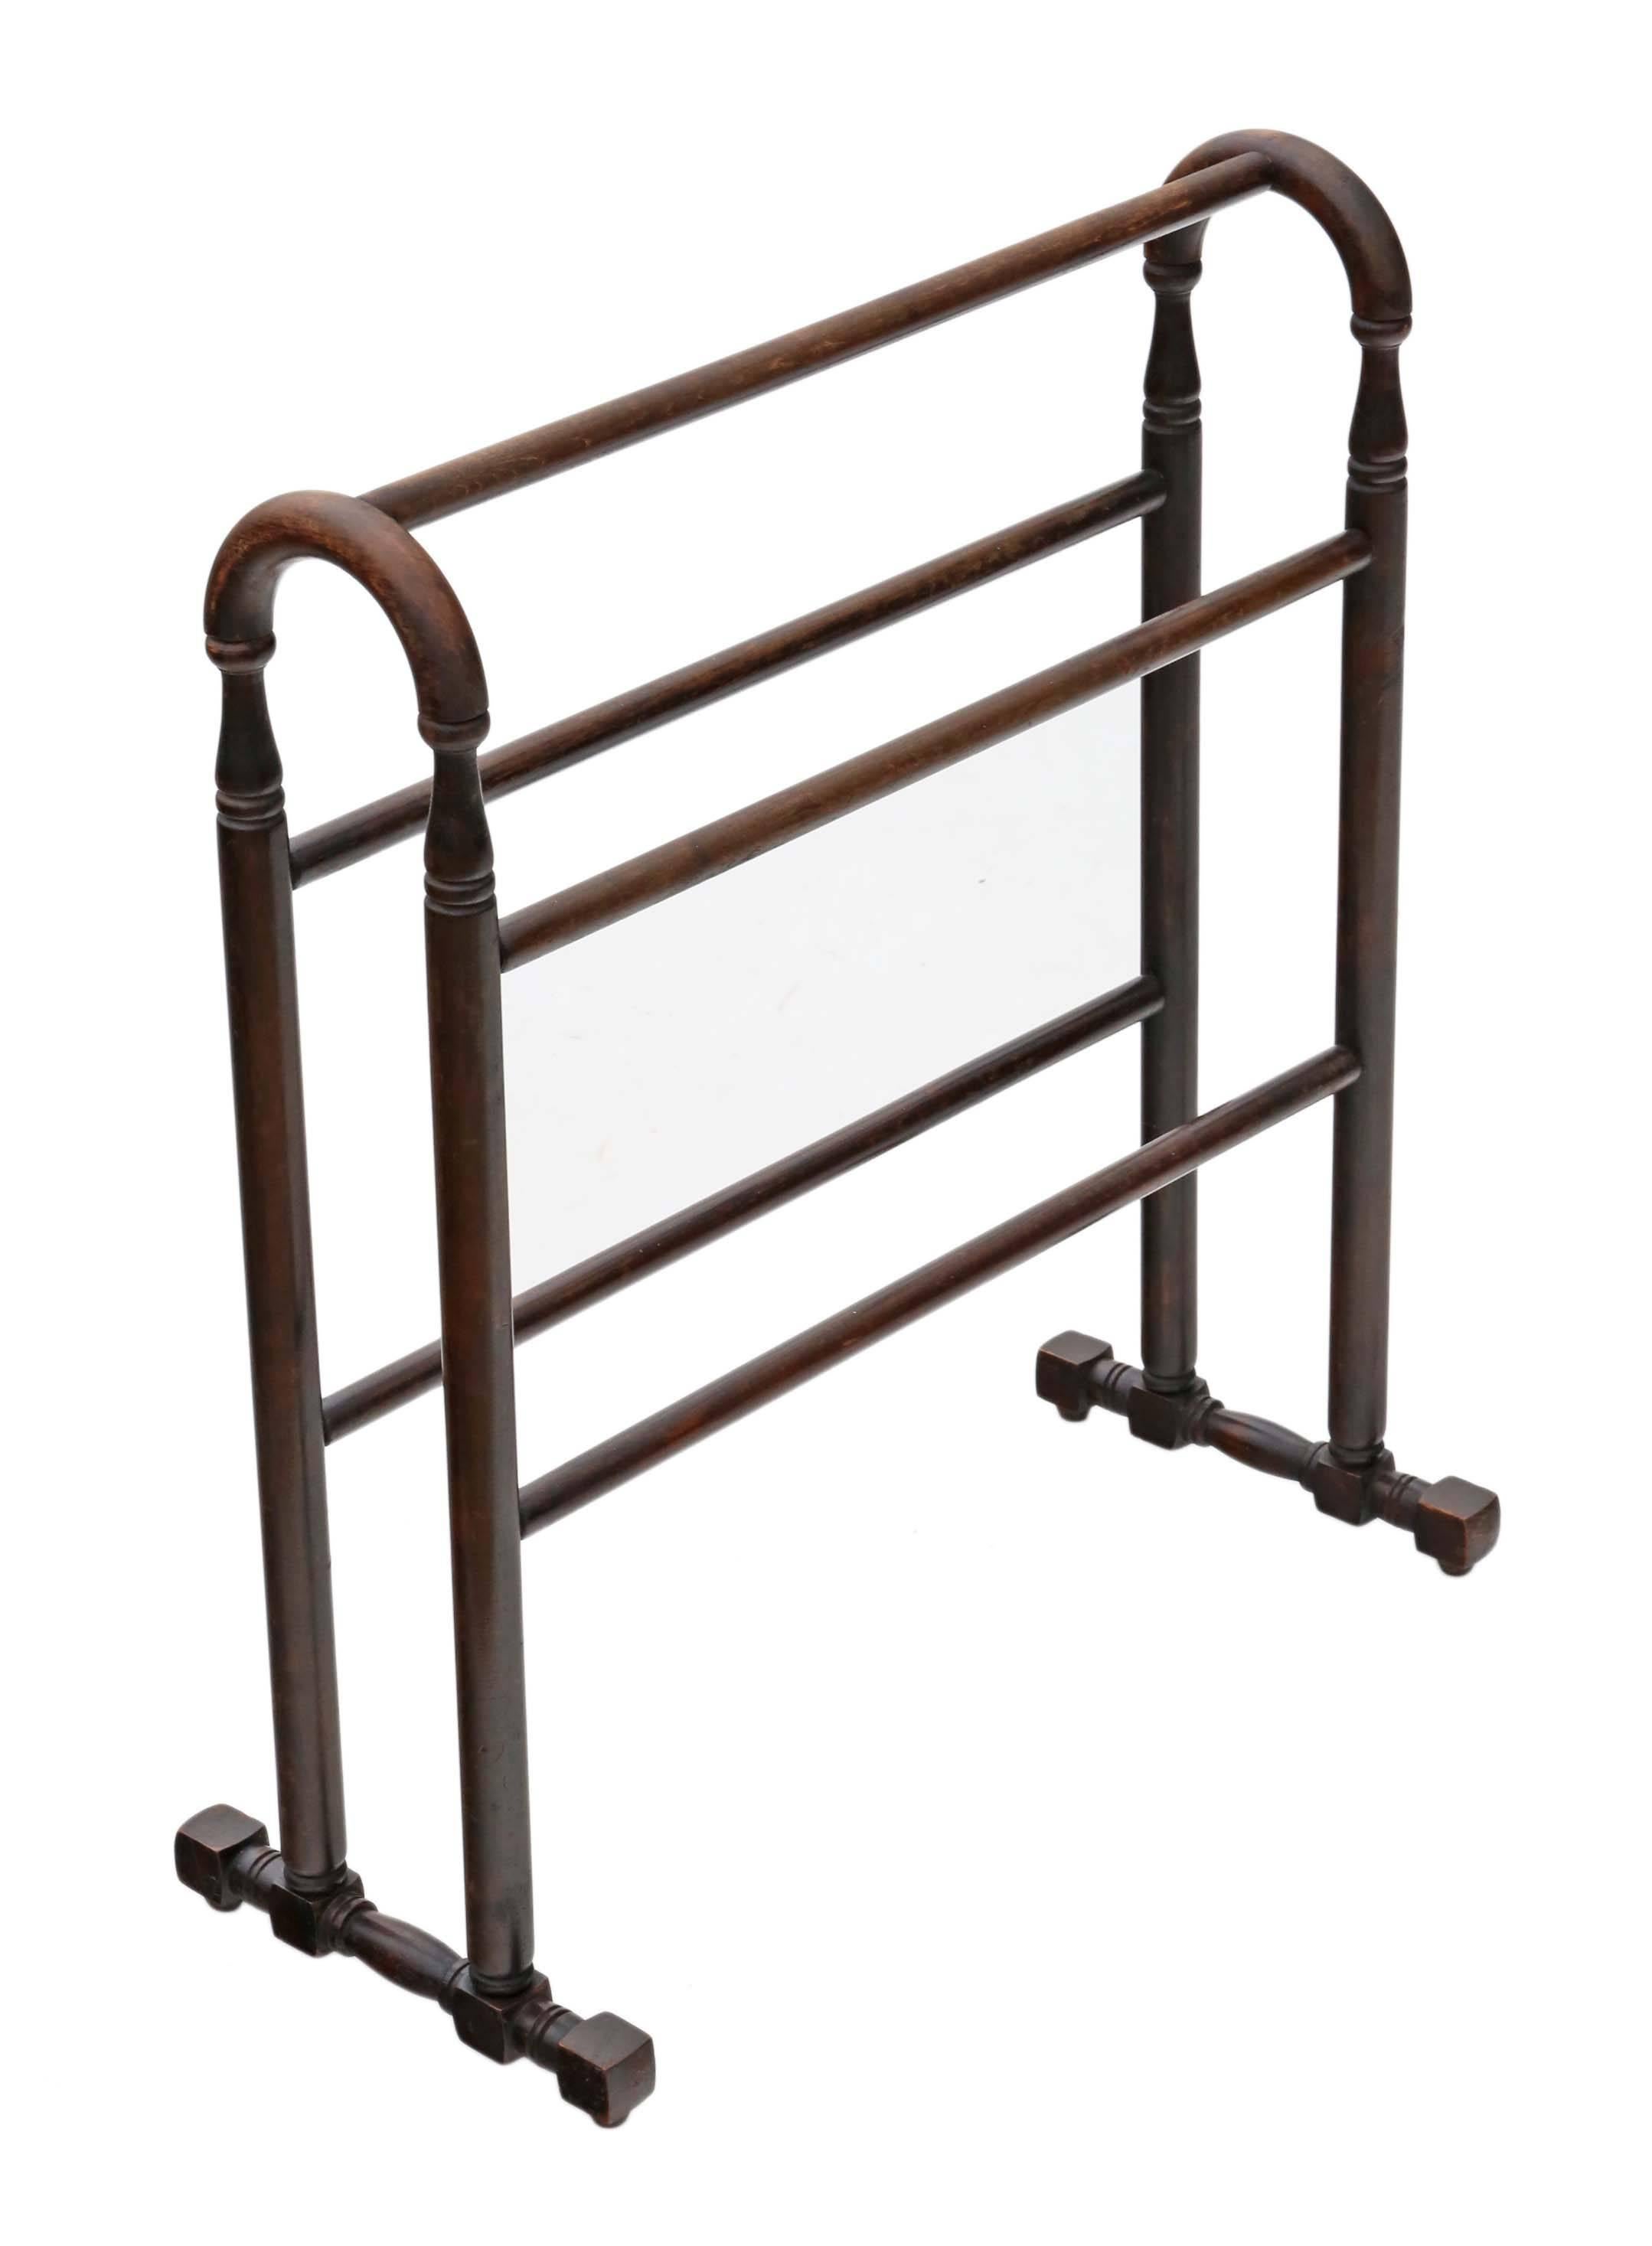 Antique Quality Victorian circa 1900 Beech Towel Rail Stand In Good Condition For Sale In Wisbech, Walton Wisbech